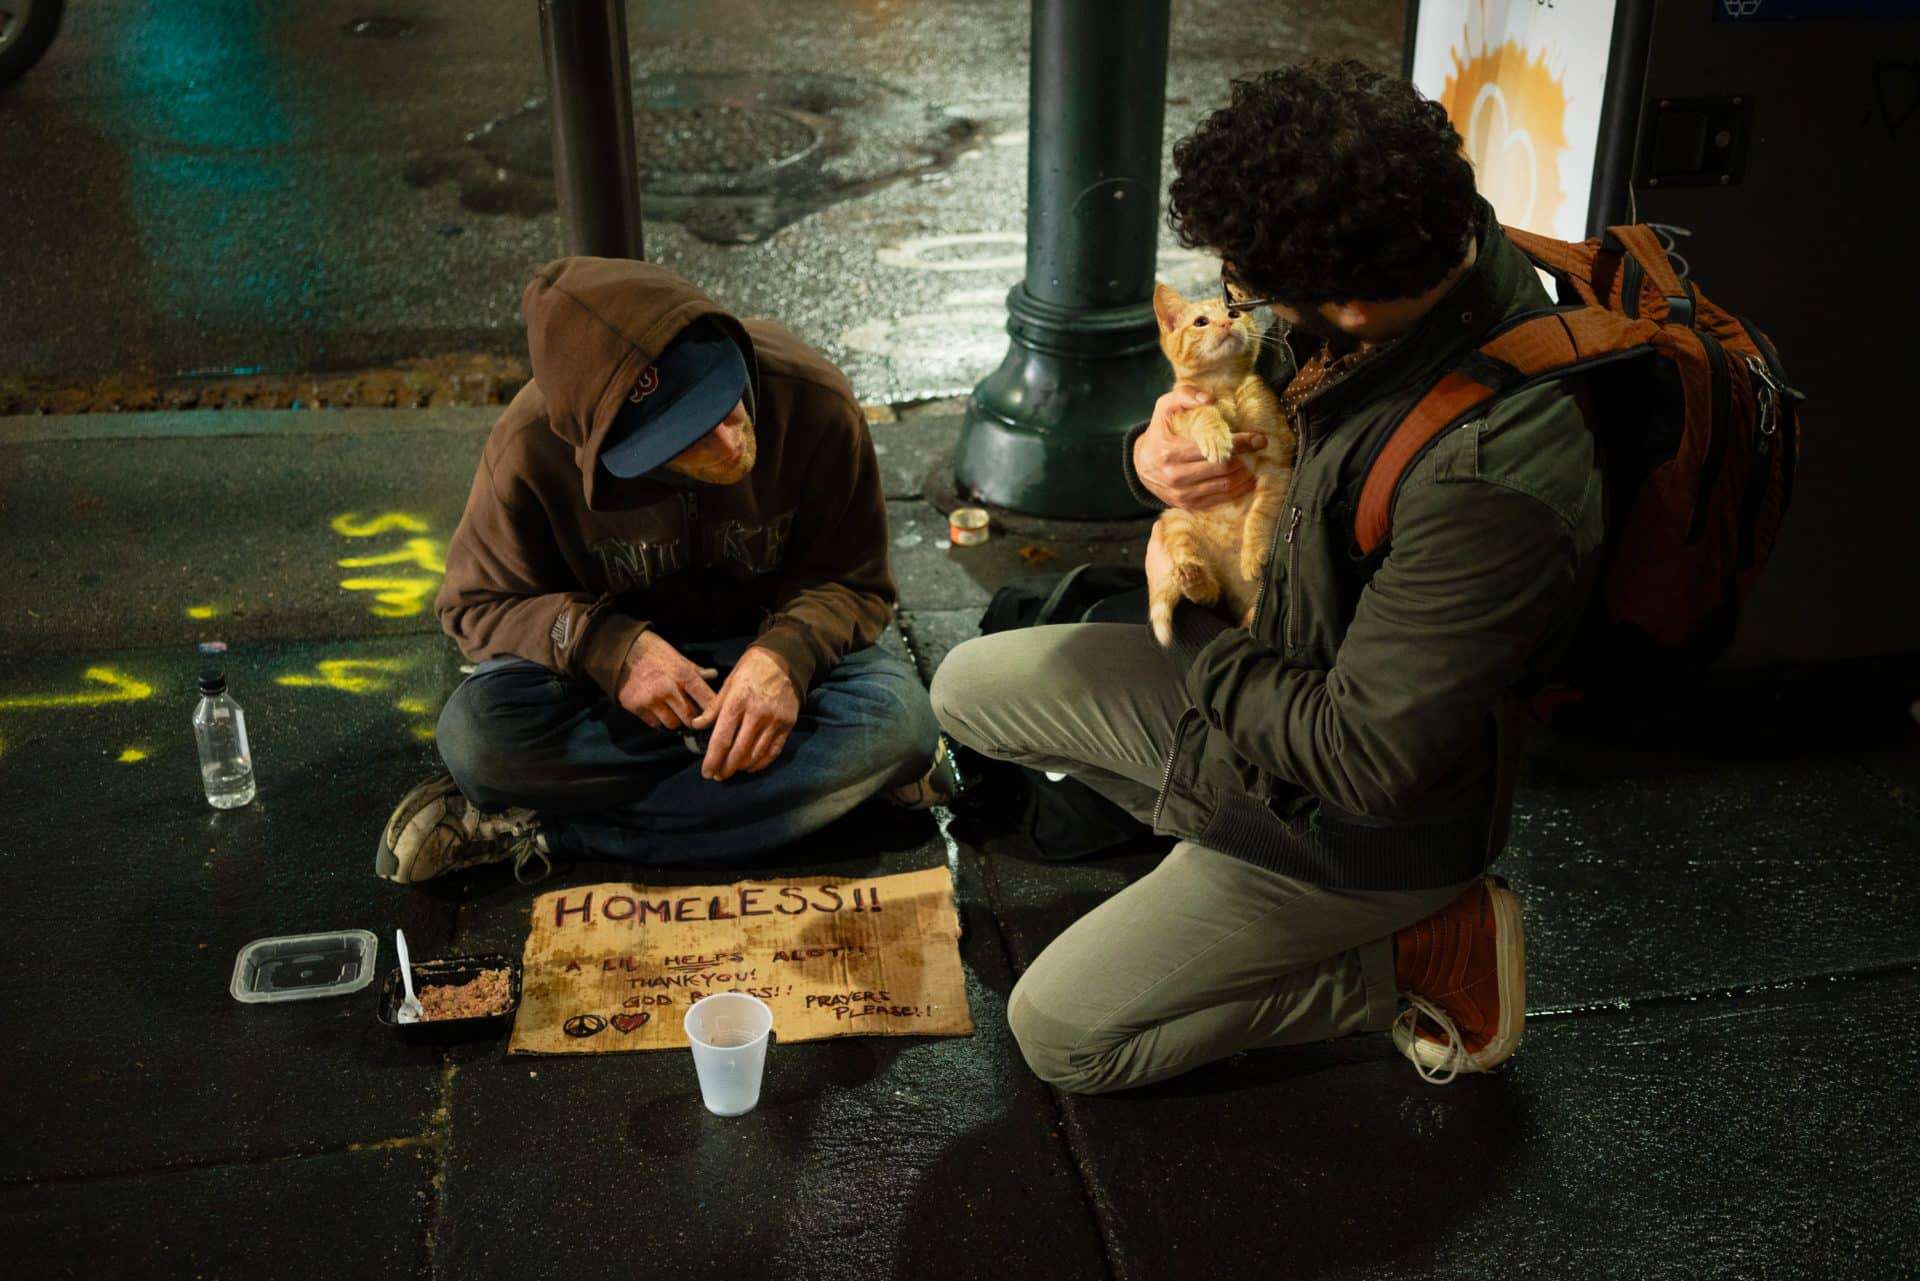 A man with a cat stops to talk with a homeless man, demonstrating that catholic social teaching must confront improper social structures.